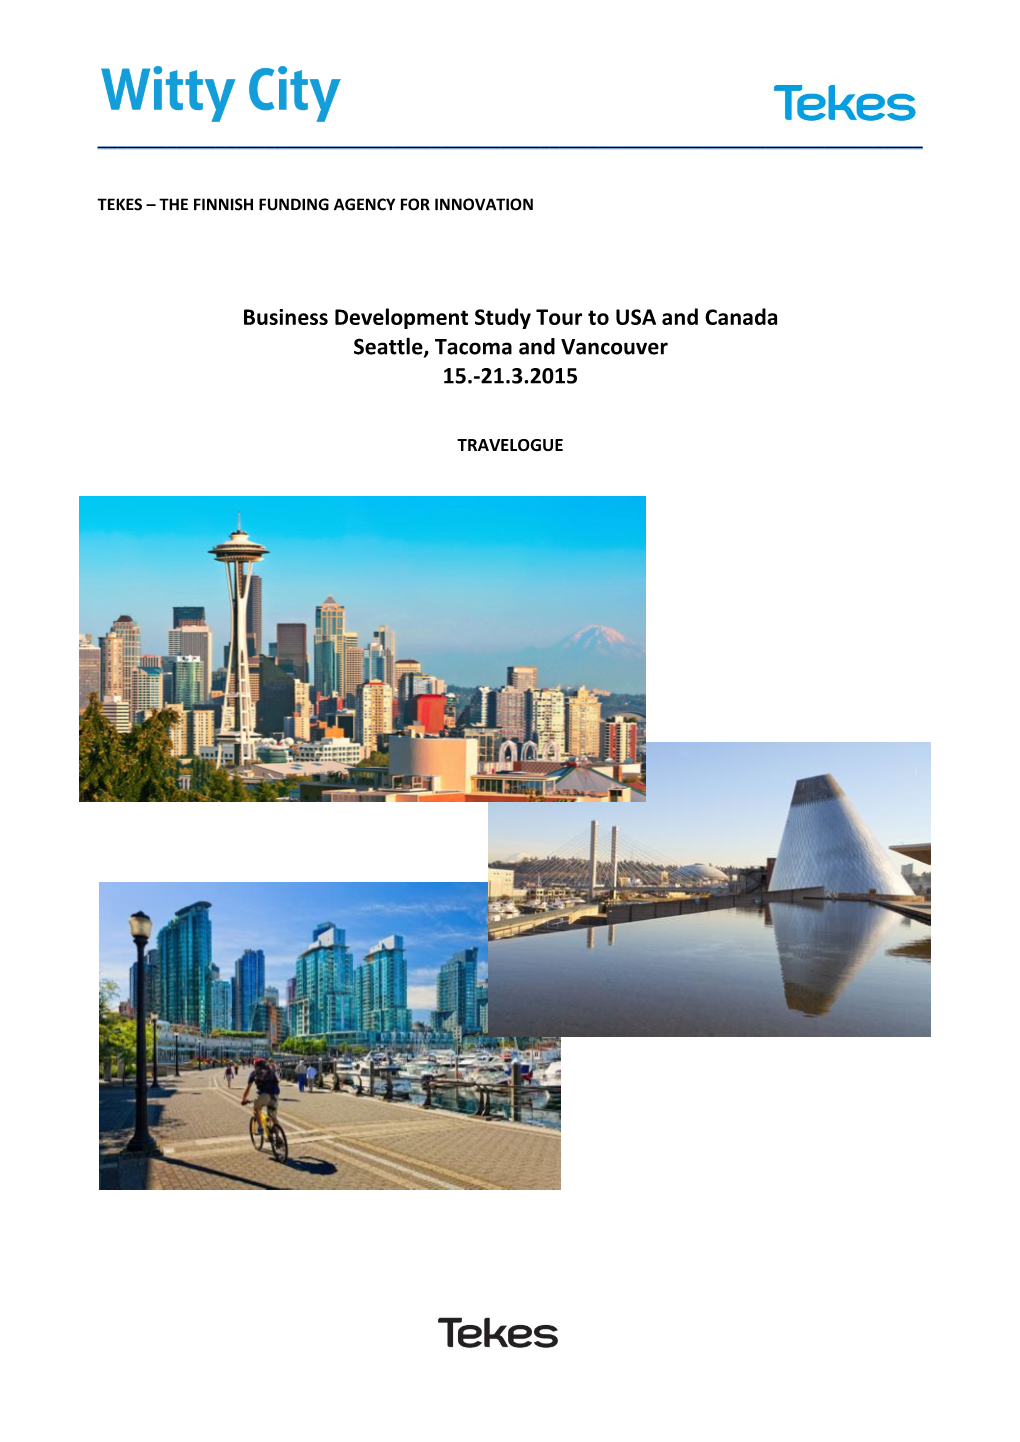 Business Development Study Tour to USA and Canada Seattle, Tacoma and Vancouver 15.-21.3.2015